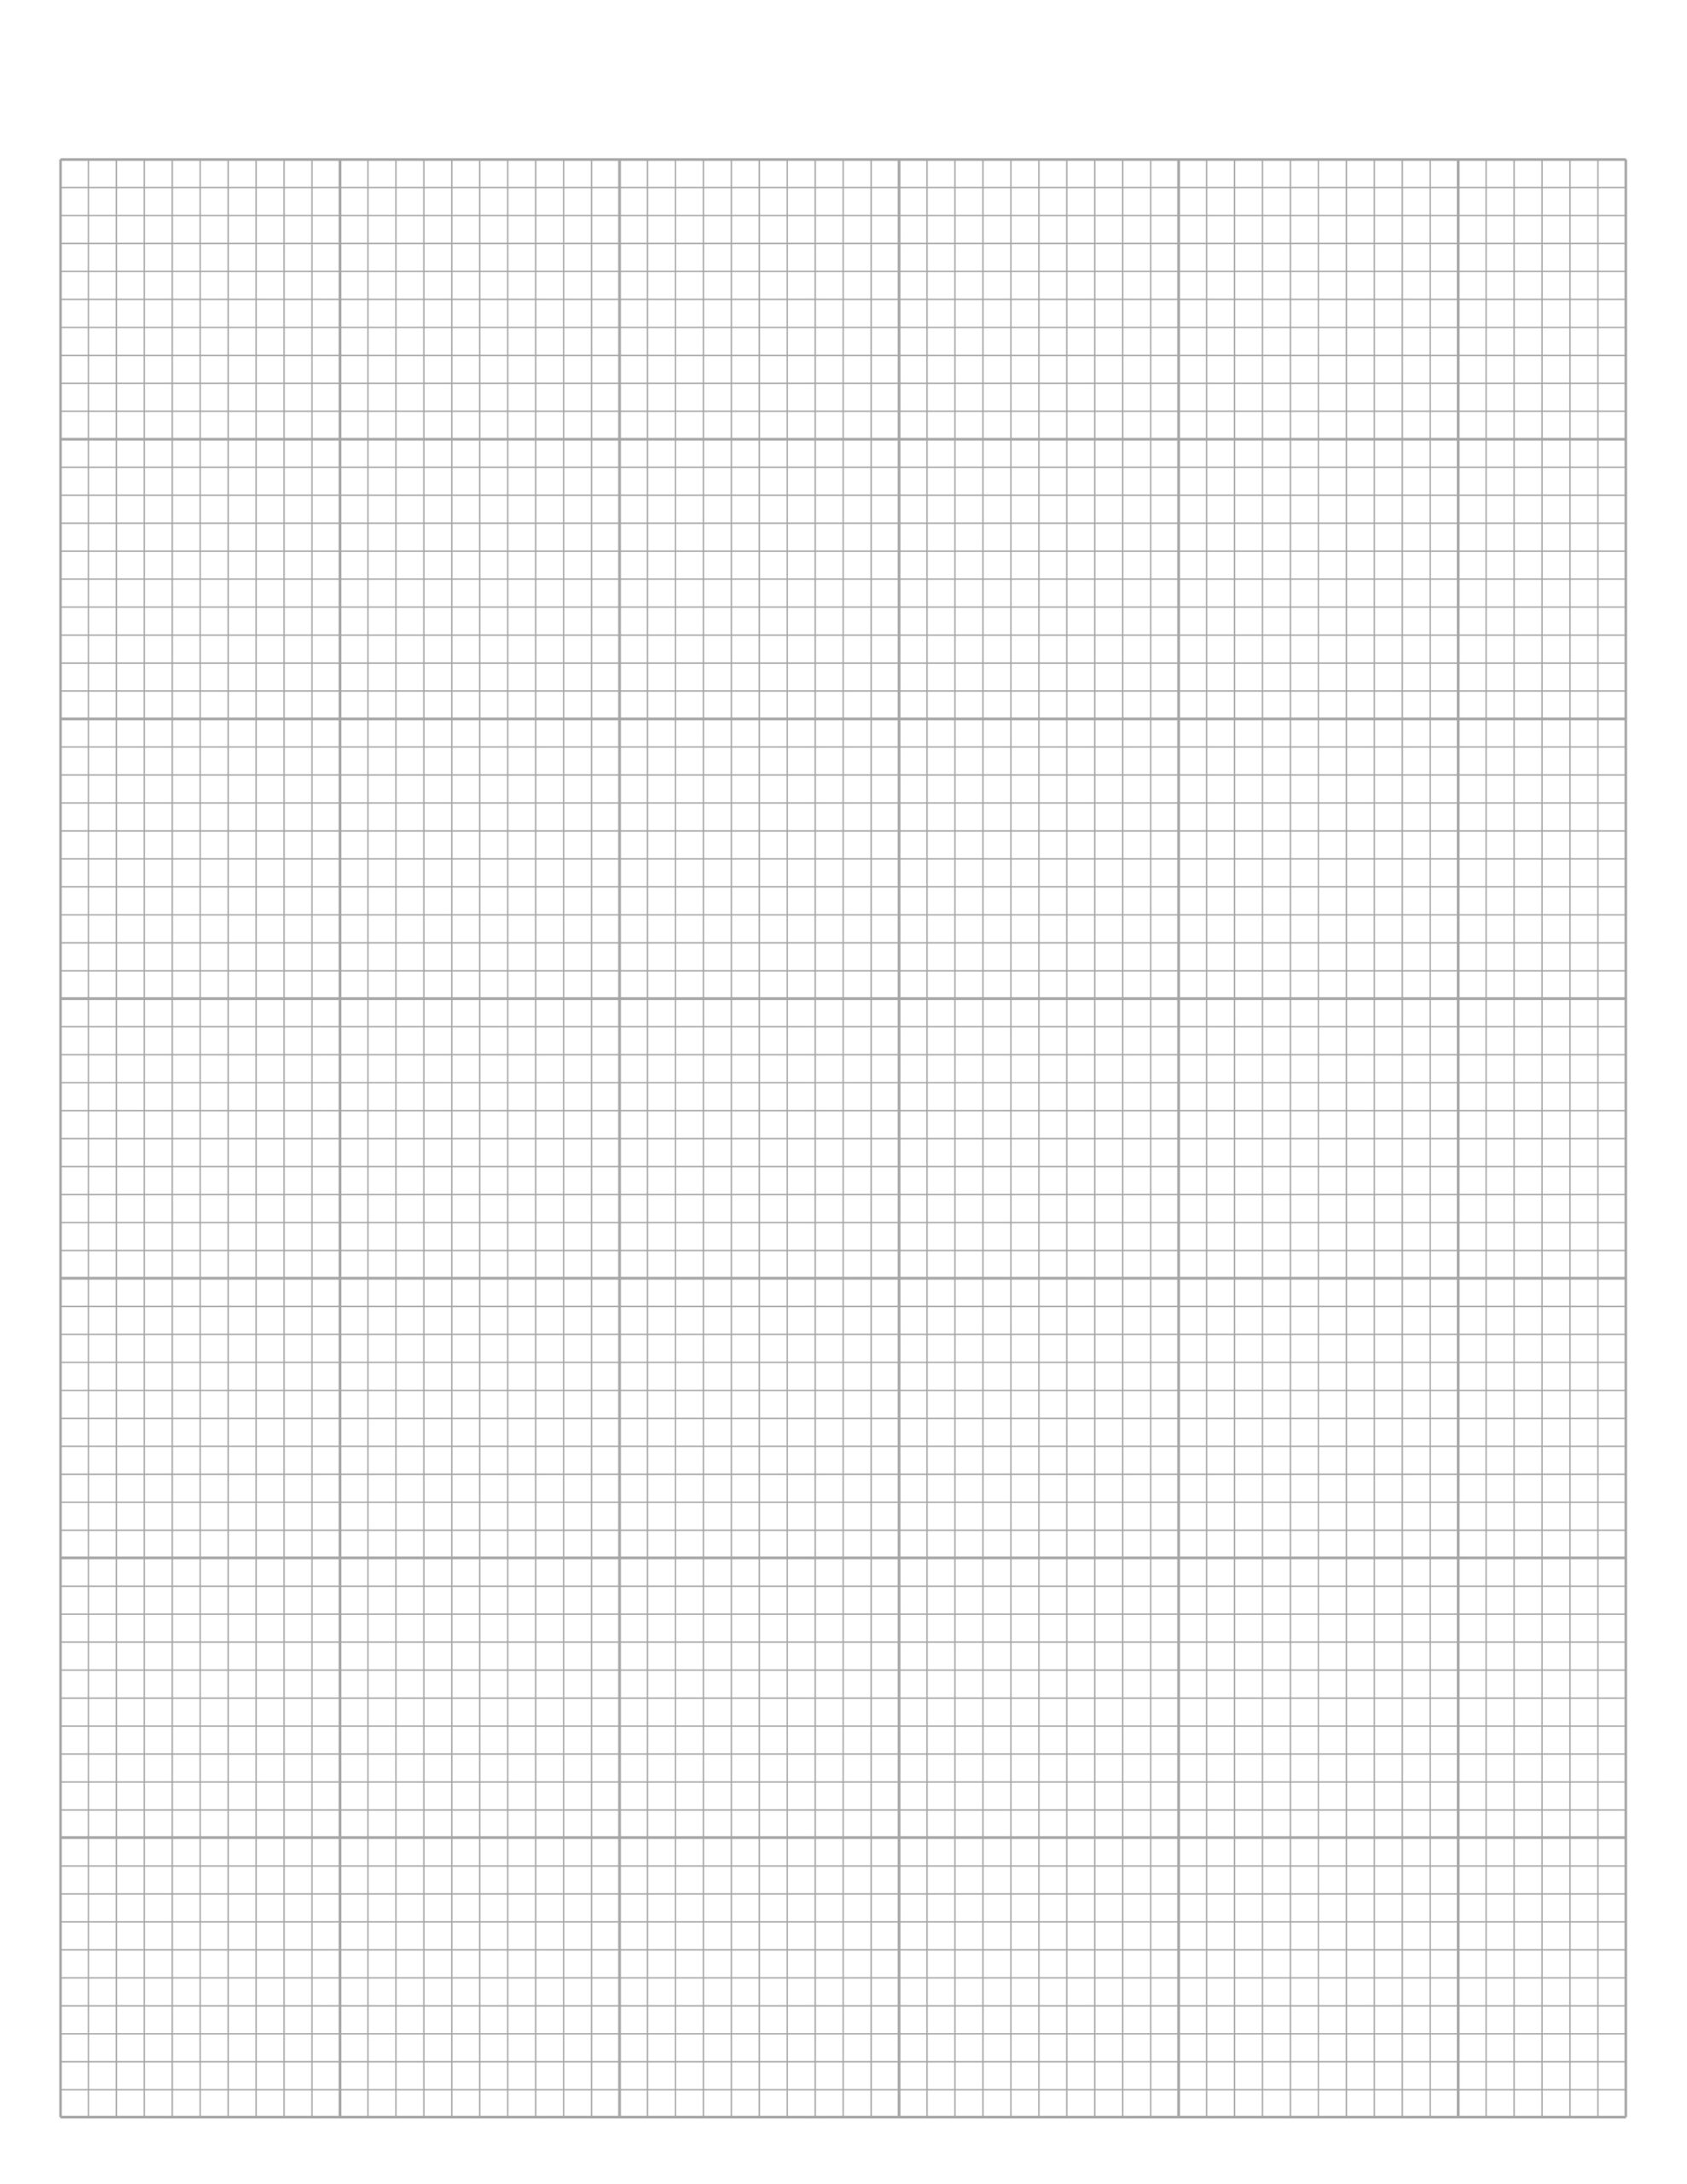 7 X 7 Graph Paper Printable 7 Count Cross Stitch Grid Free Download